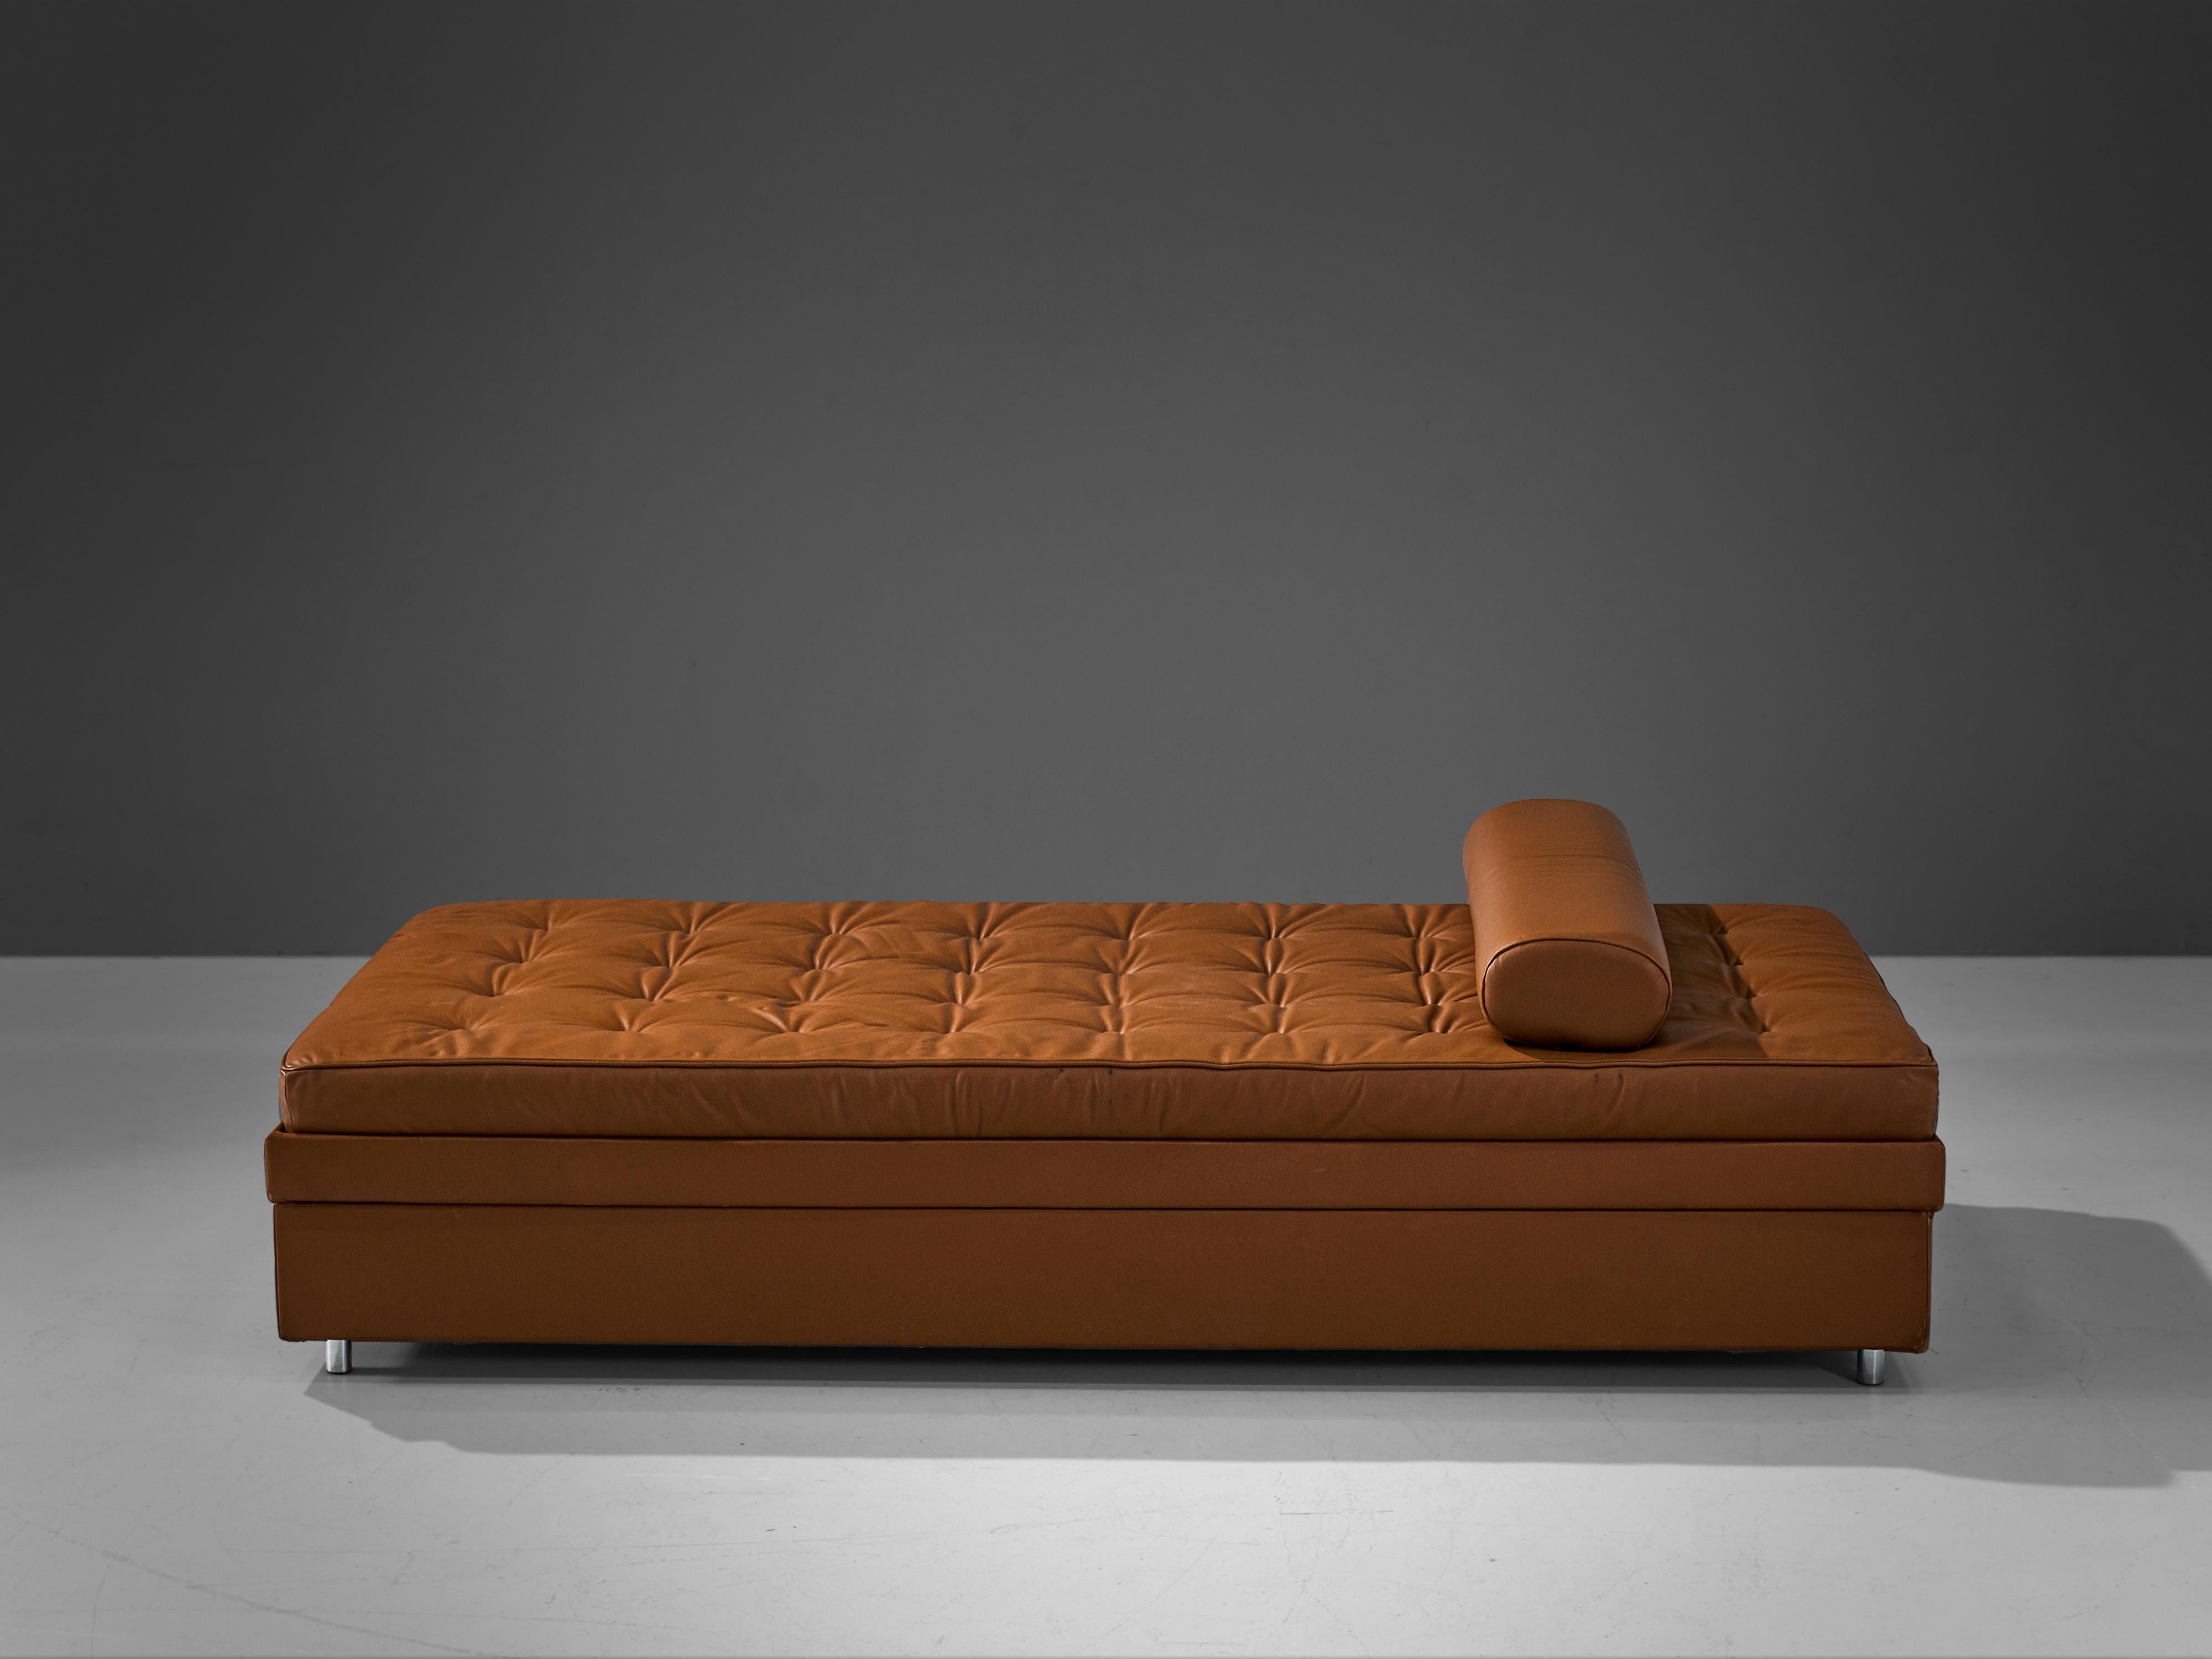 Daybed, leather, chrome, Europe, 1960s

Well designed daybed in stunning cognac leather. The daybed is placed on small, chrome legs that form a striking combination with the tufted cognac mattress. Due to the small legs, a nearly floating expression